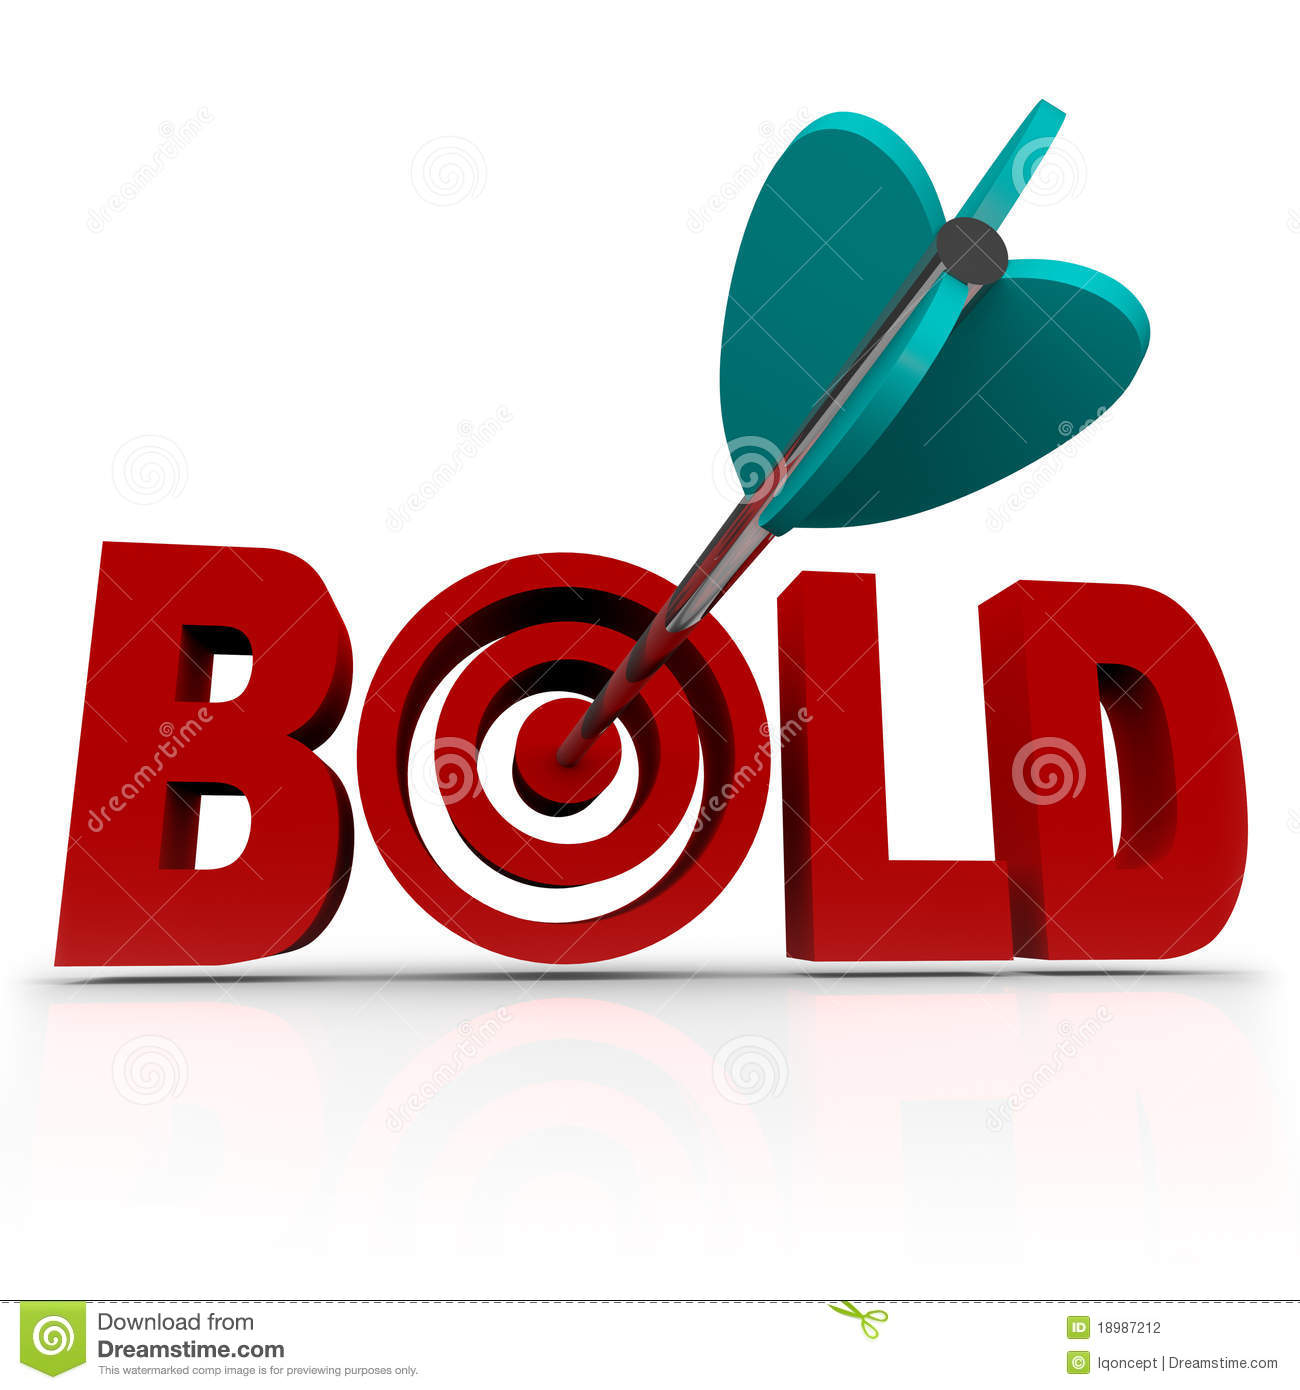 The Word Bold With An Arrow Striking A Bullseye Target Symbolizing